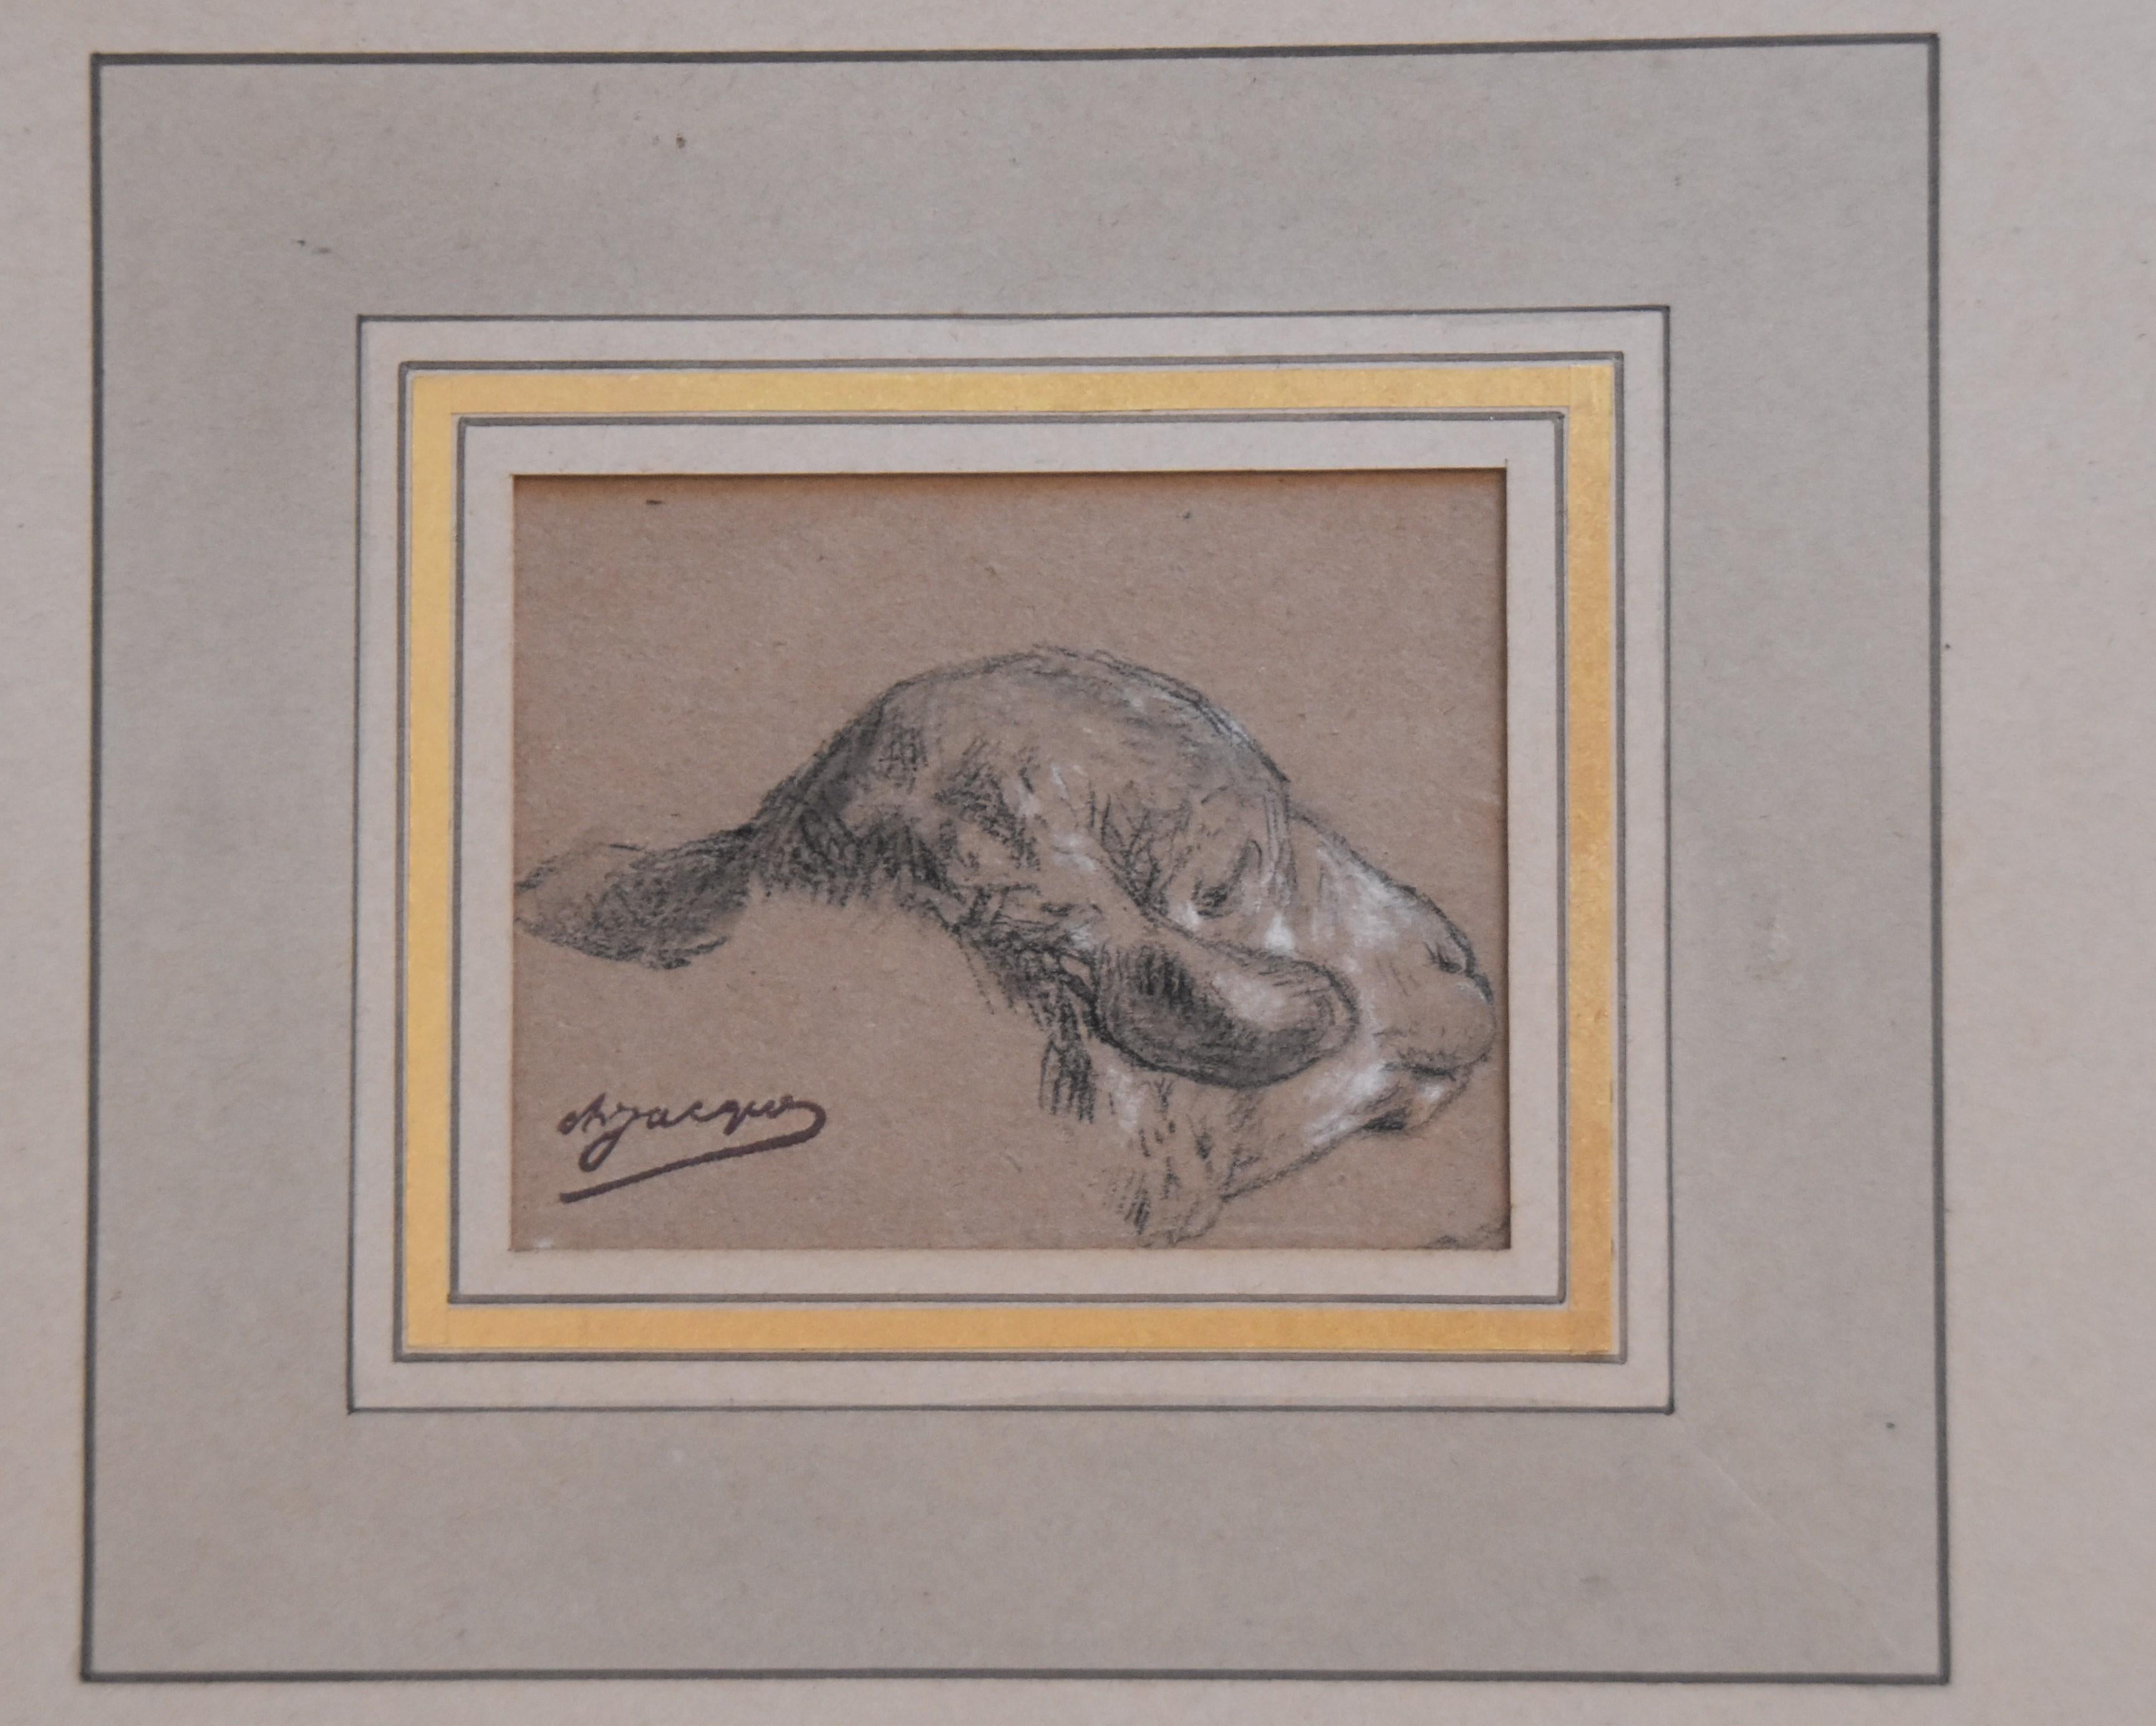 Charles-Emile Jacque (1813-1894) 
Three studies of Sheep's heads
Carbon pencil and heightenings of white gouache on paper 
Stamp of the artist's estate on each one lower right
5.6 x 6.8 cm
5.8 x 3.9 cm 
5.8 x 3.9 cm
In the same original mount, the